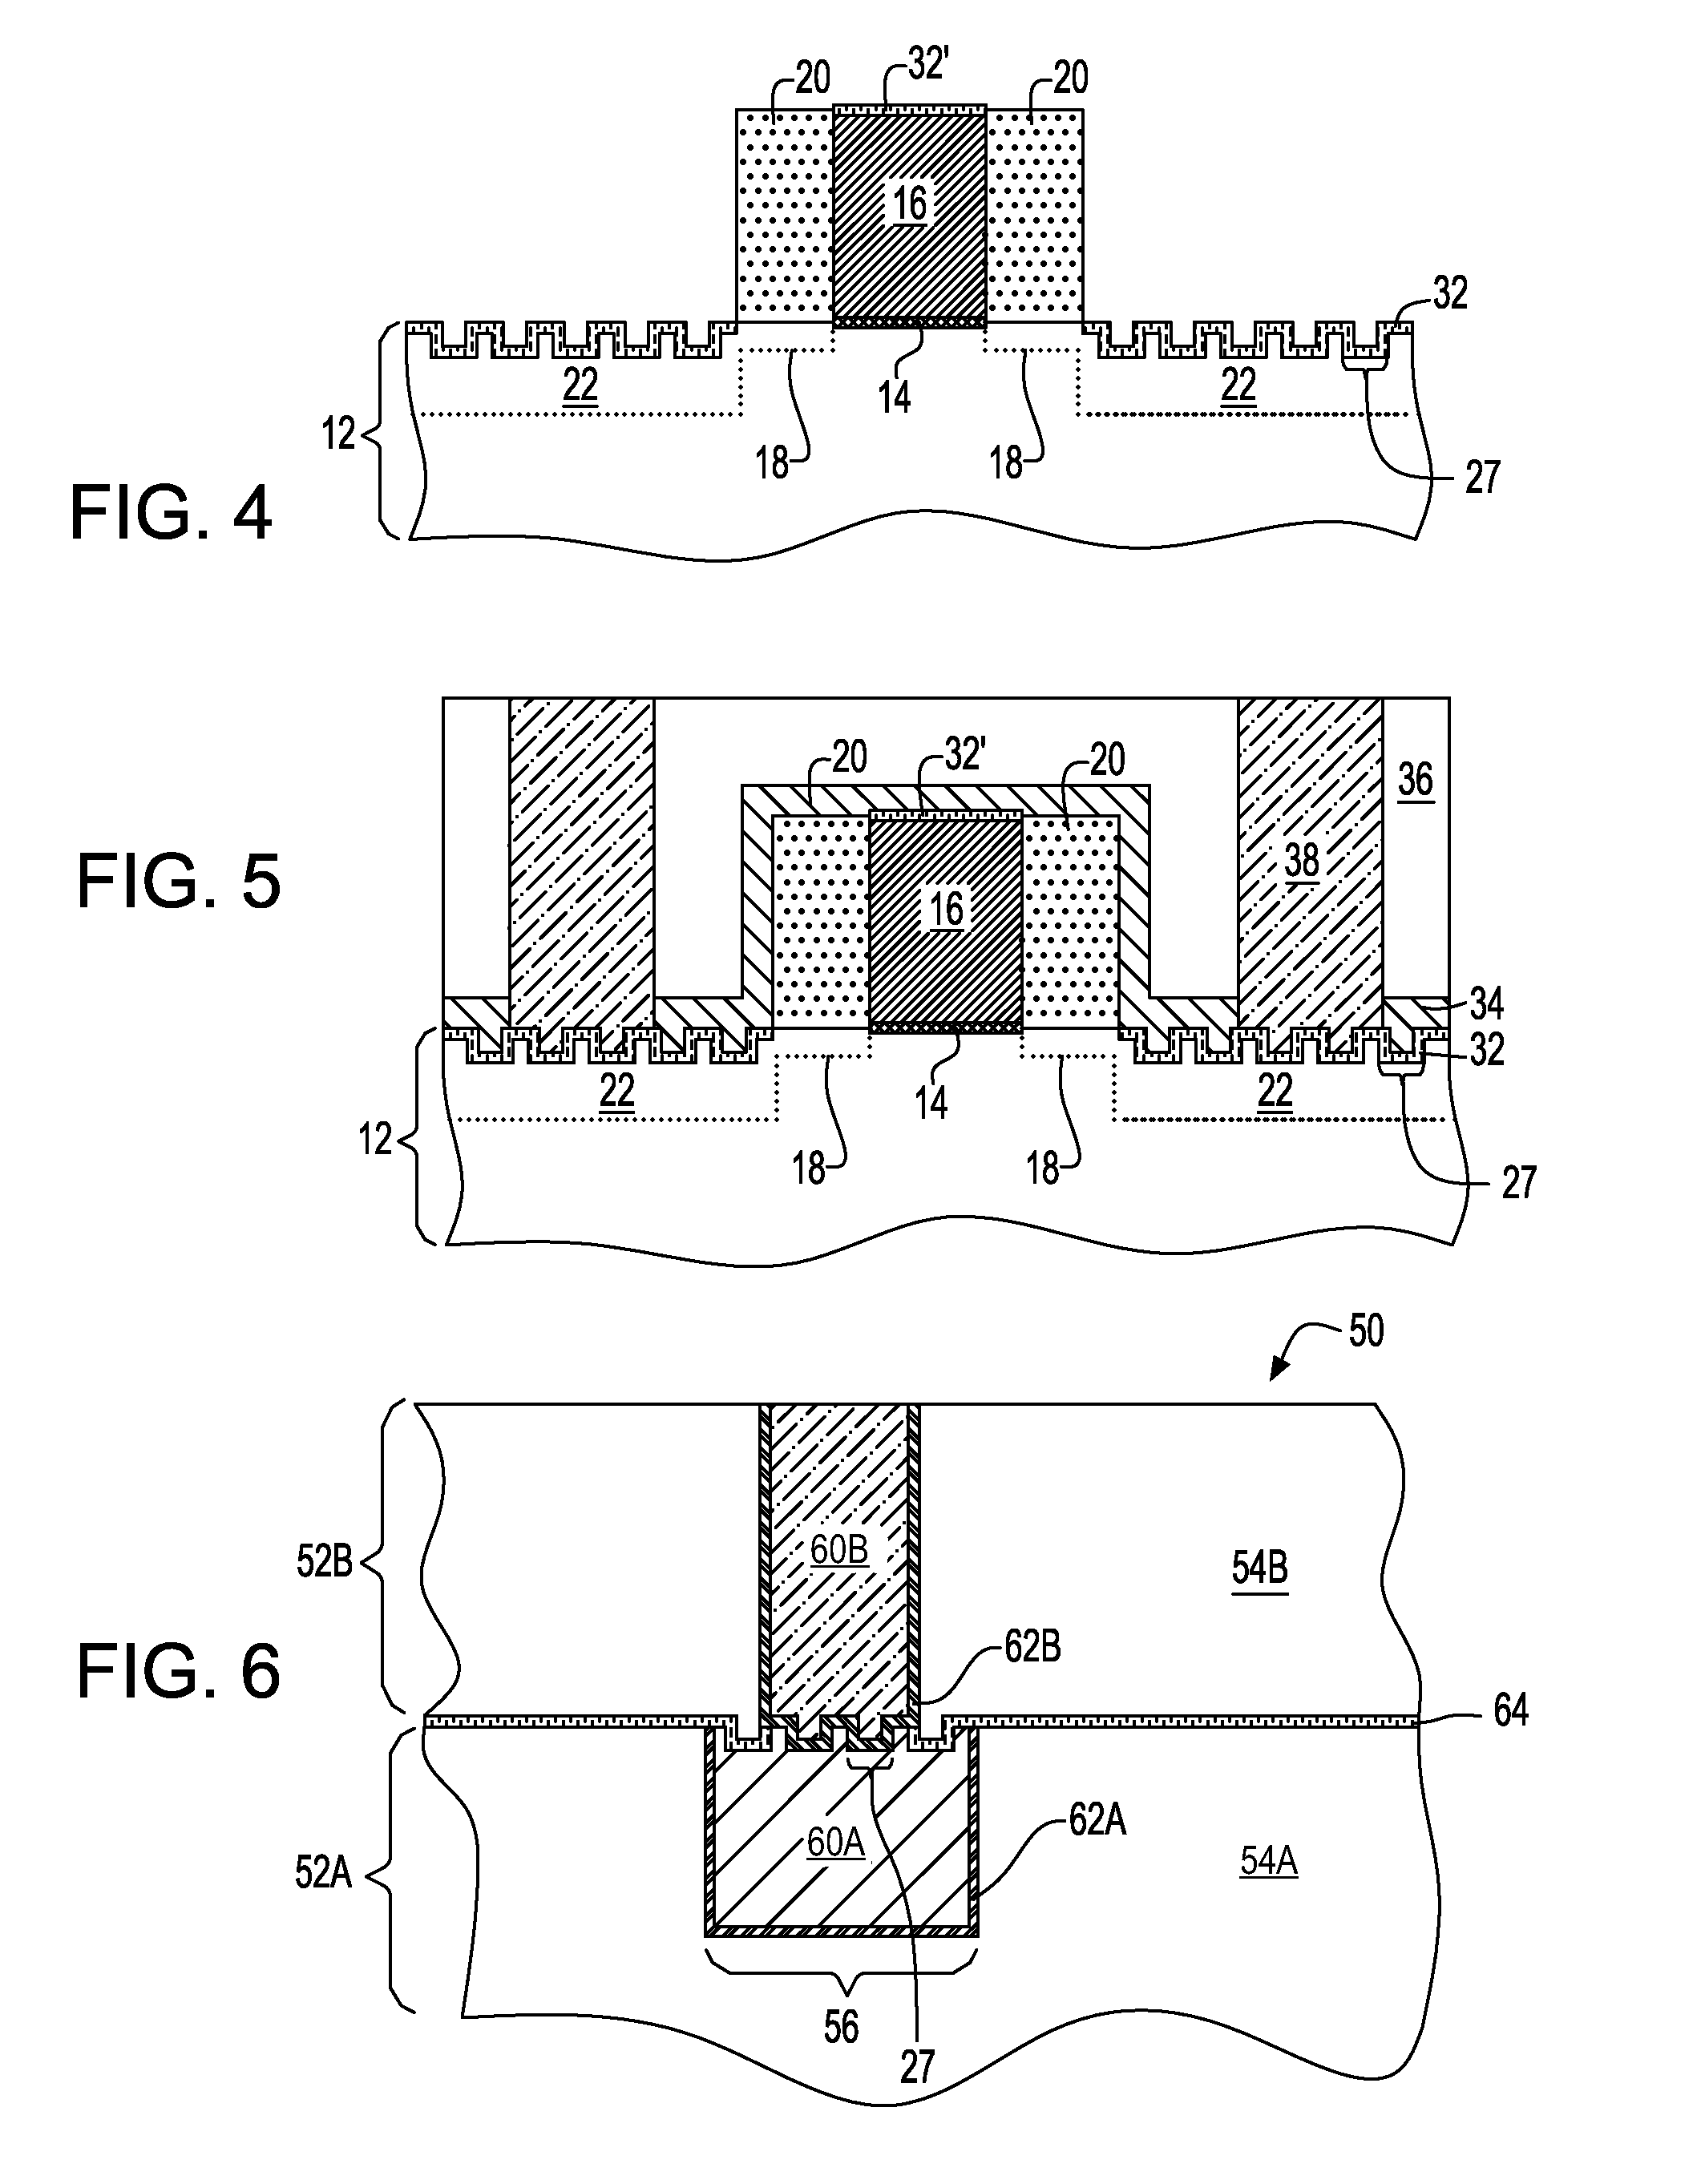 Semiconductor structures having improved contact resistance